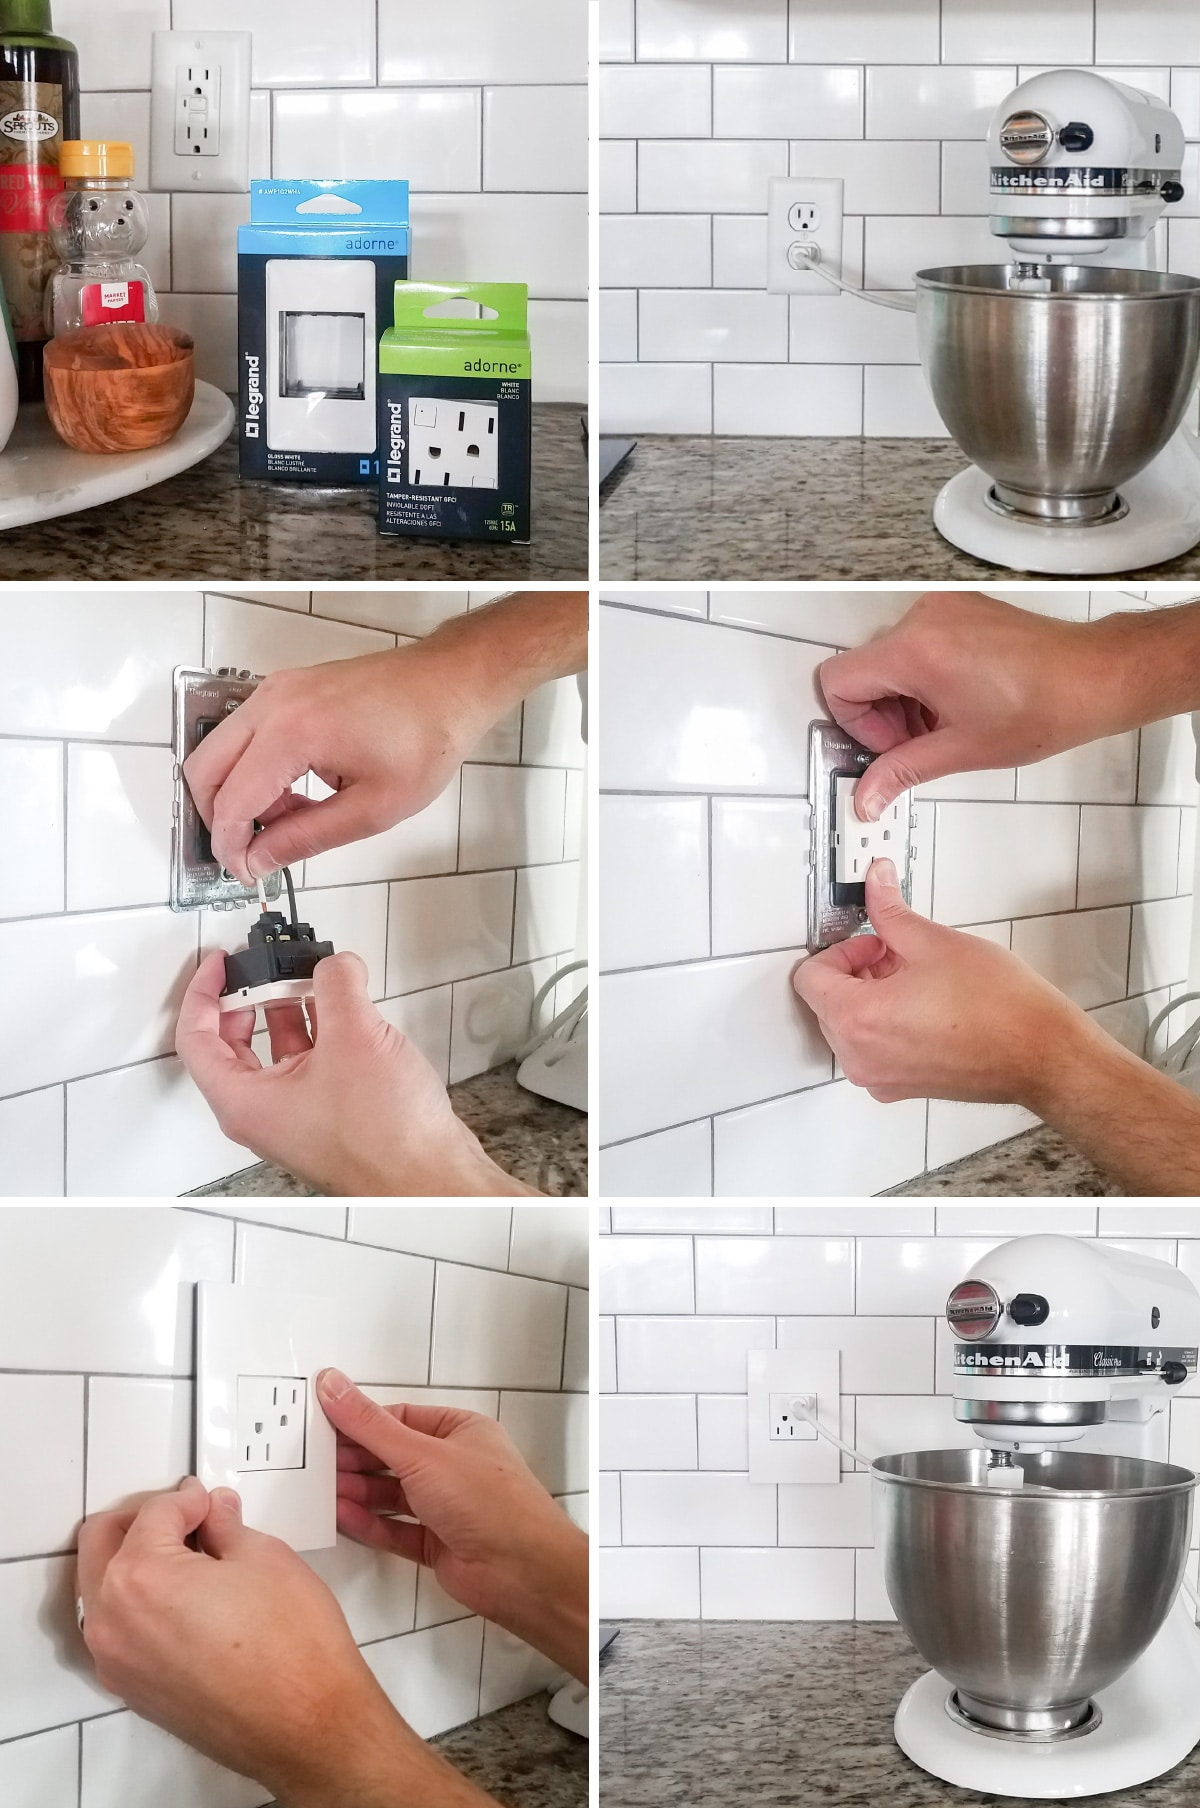 Installing an outlet from the Legrand adorne collection step by step photos